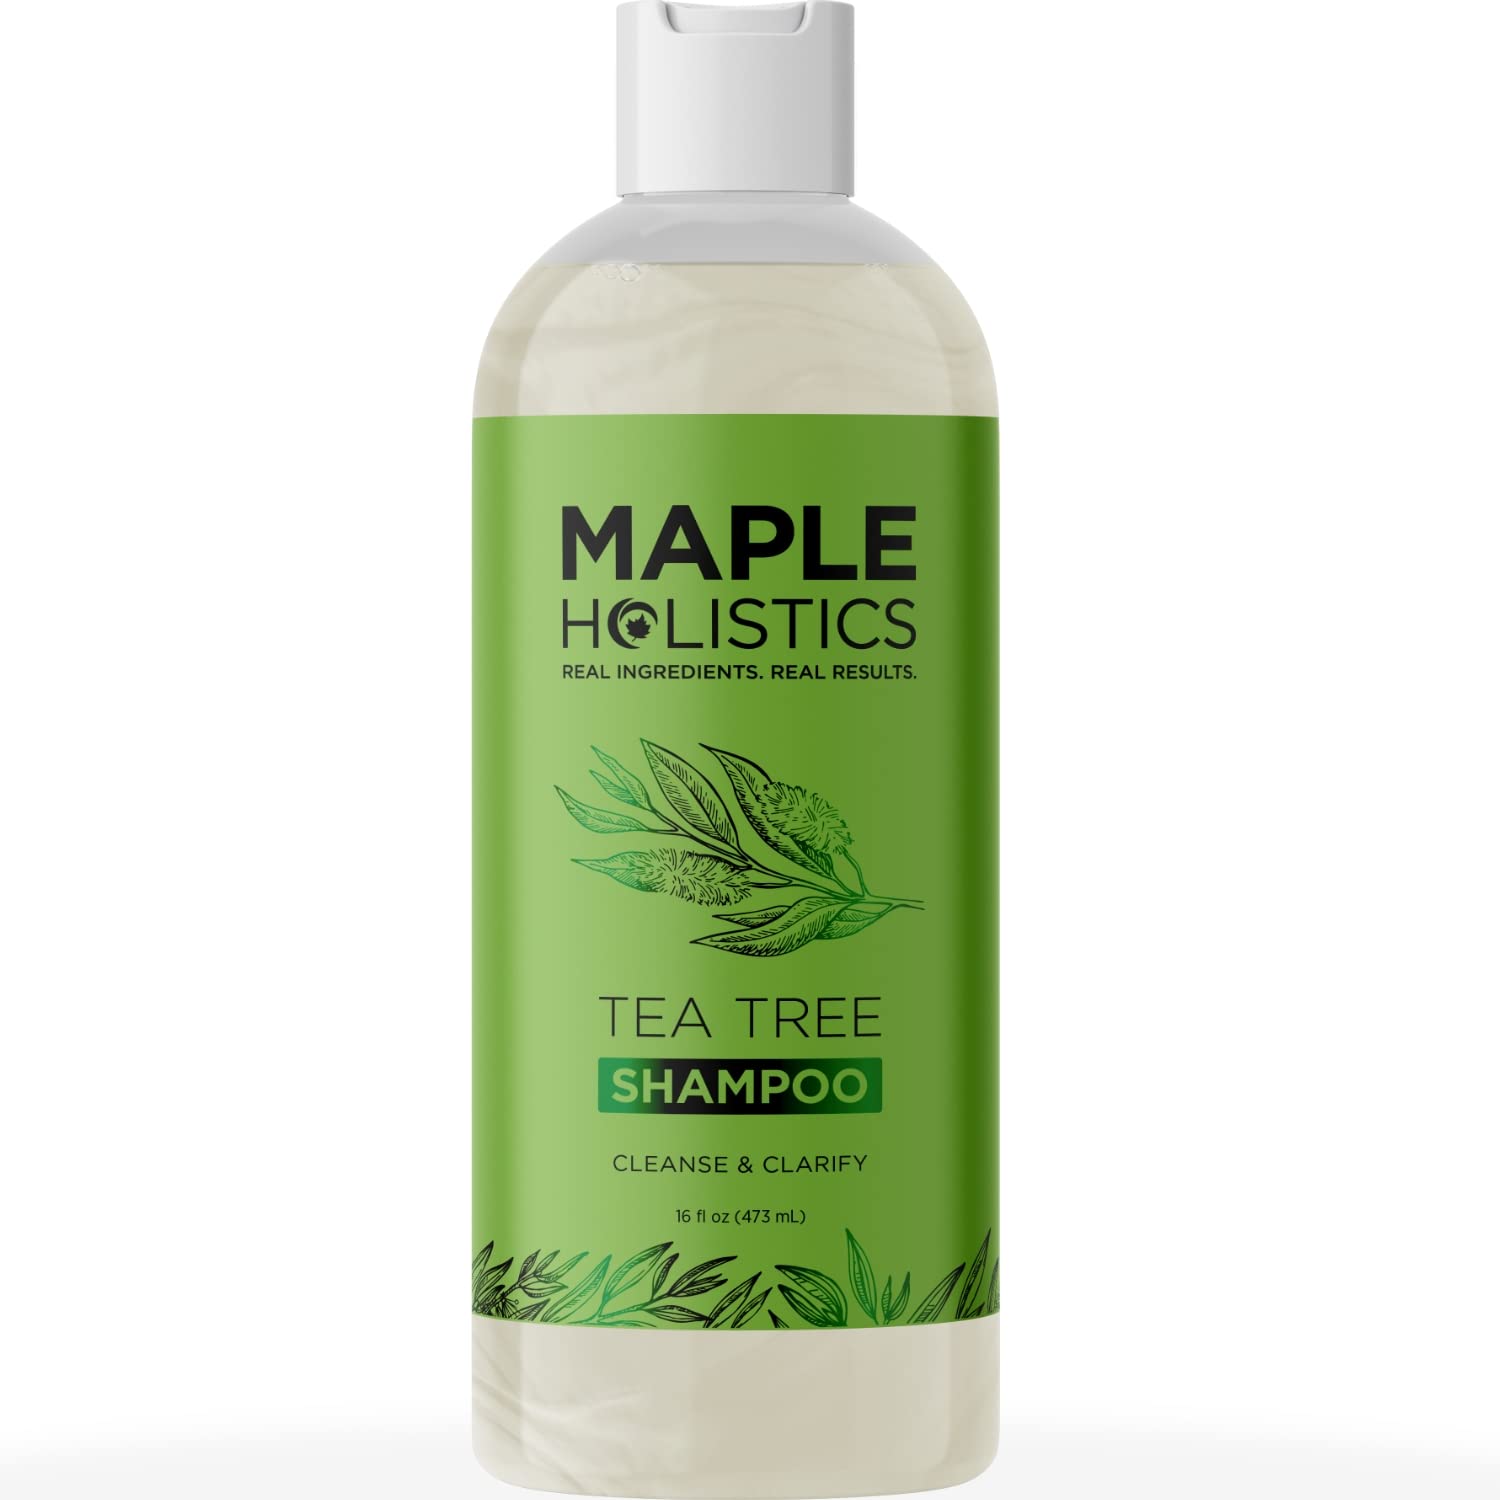  2. Maple Holistic Teatree for Oily Hair and Dandruff 